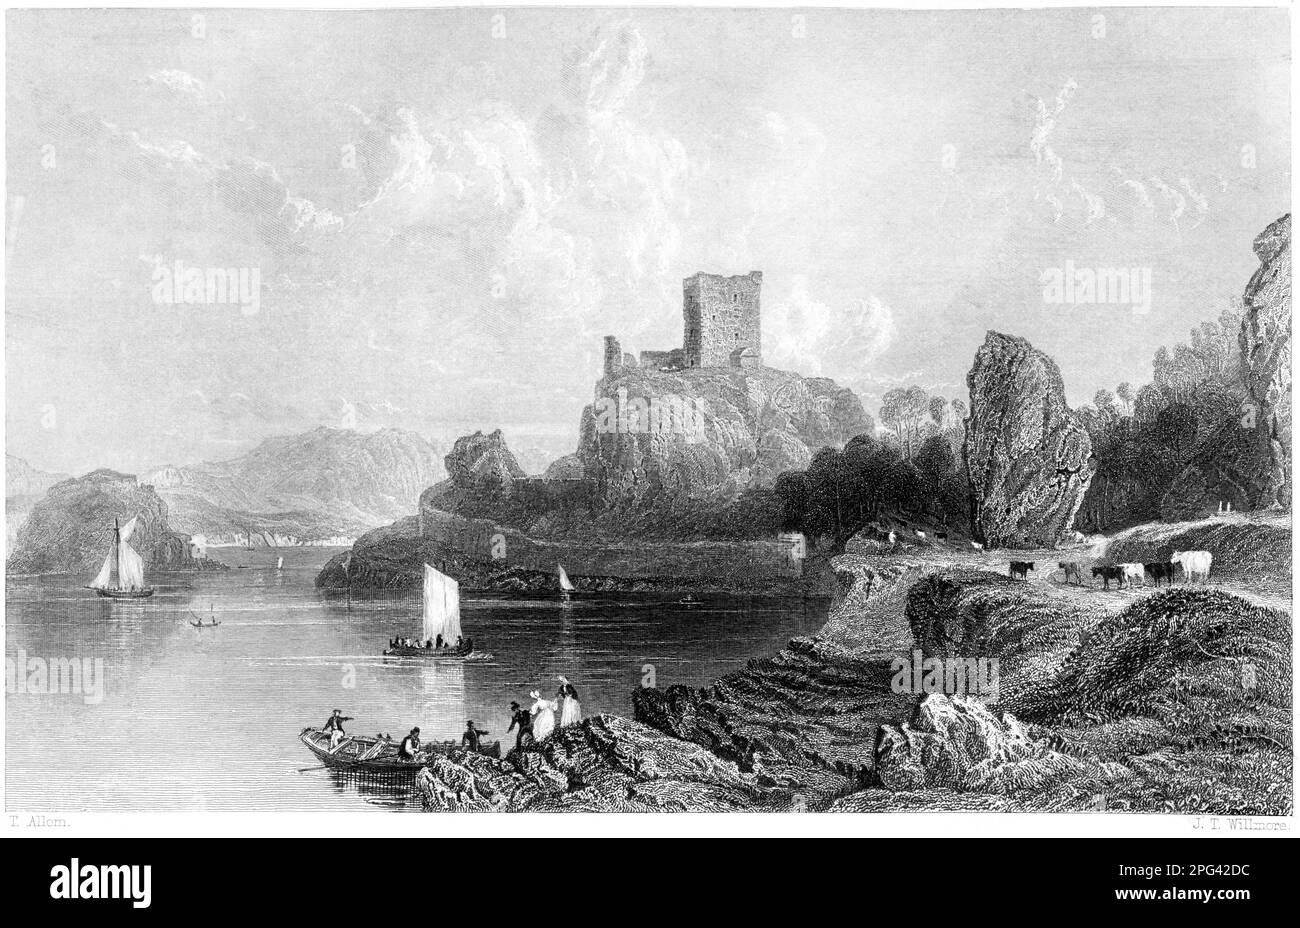 An engraving of Dunolly (Dunollie) Castle, near Oban, Argyleshire, Scotland UK scanned at high resolution from a book printed in 1840. Stock Photo